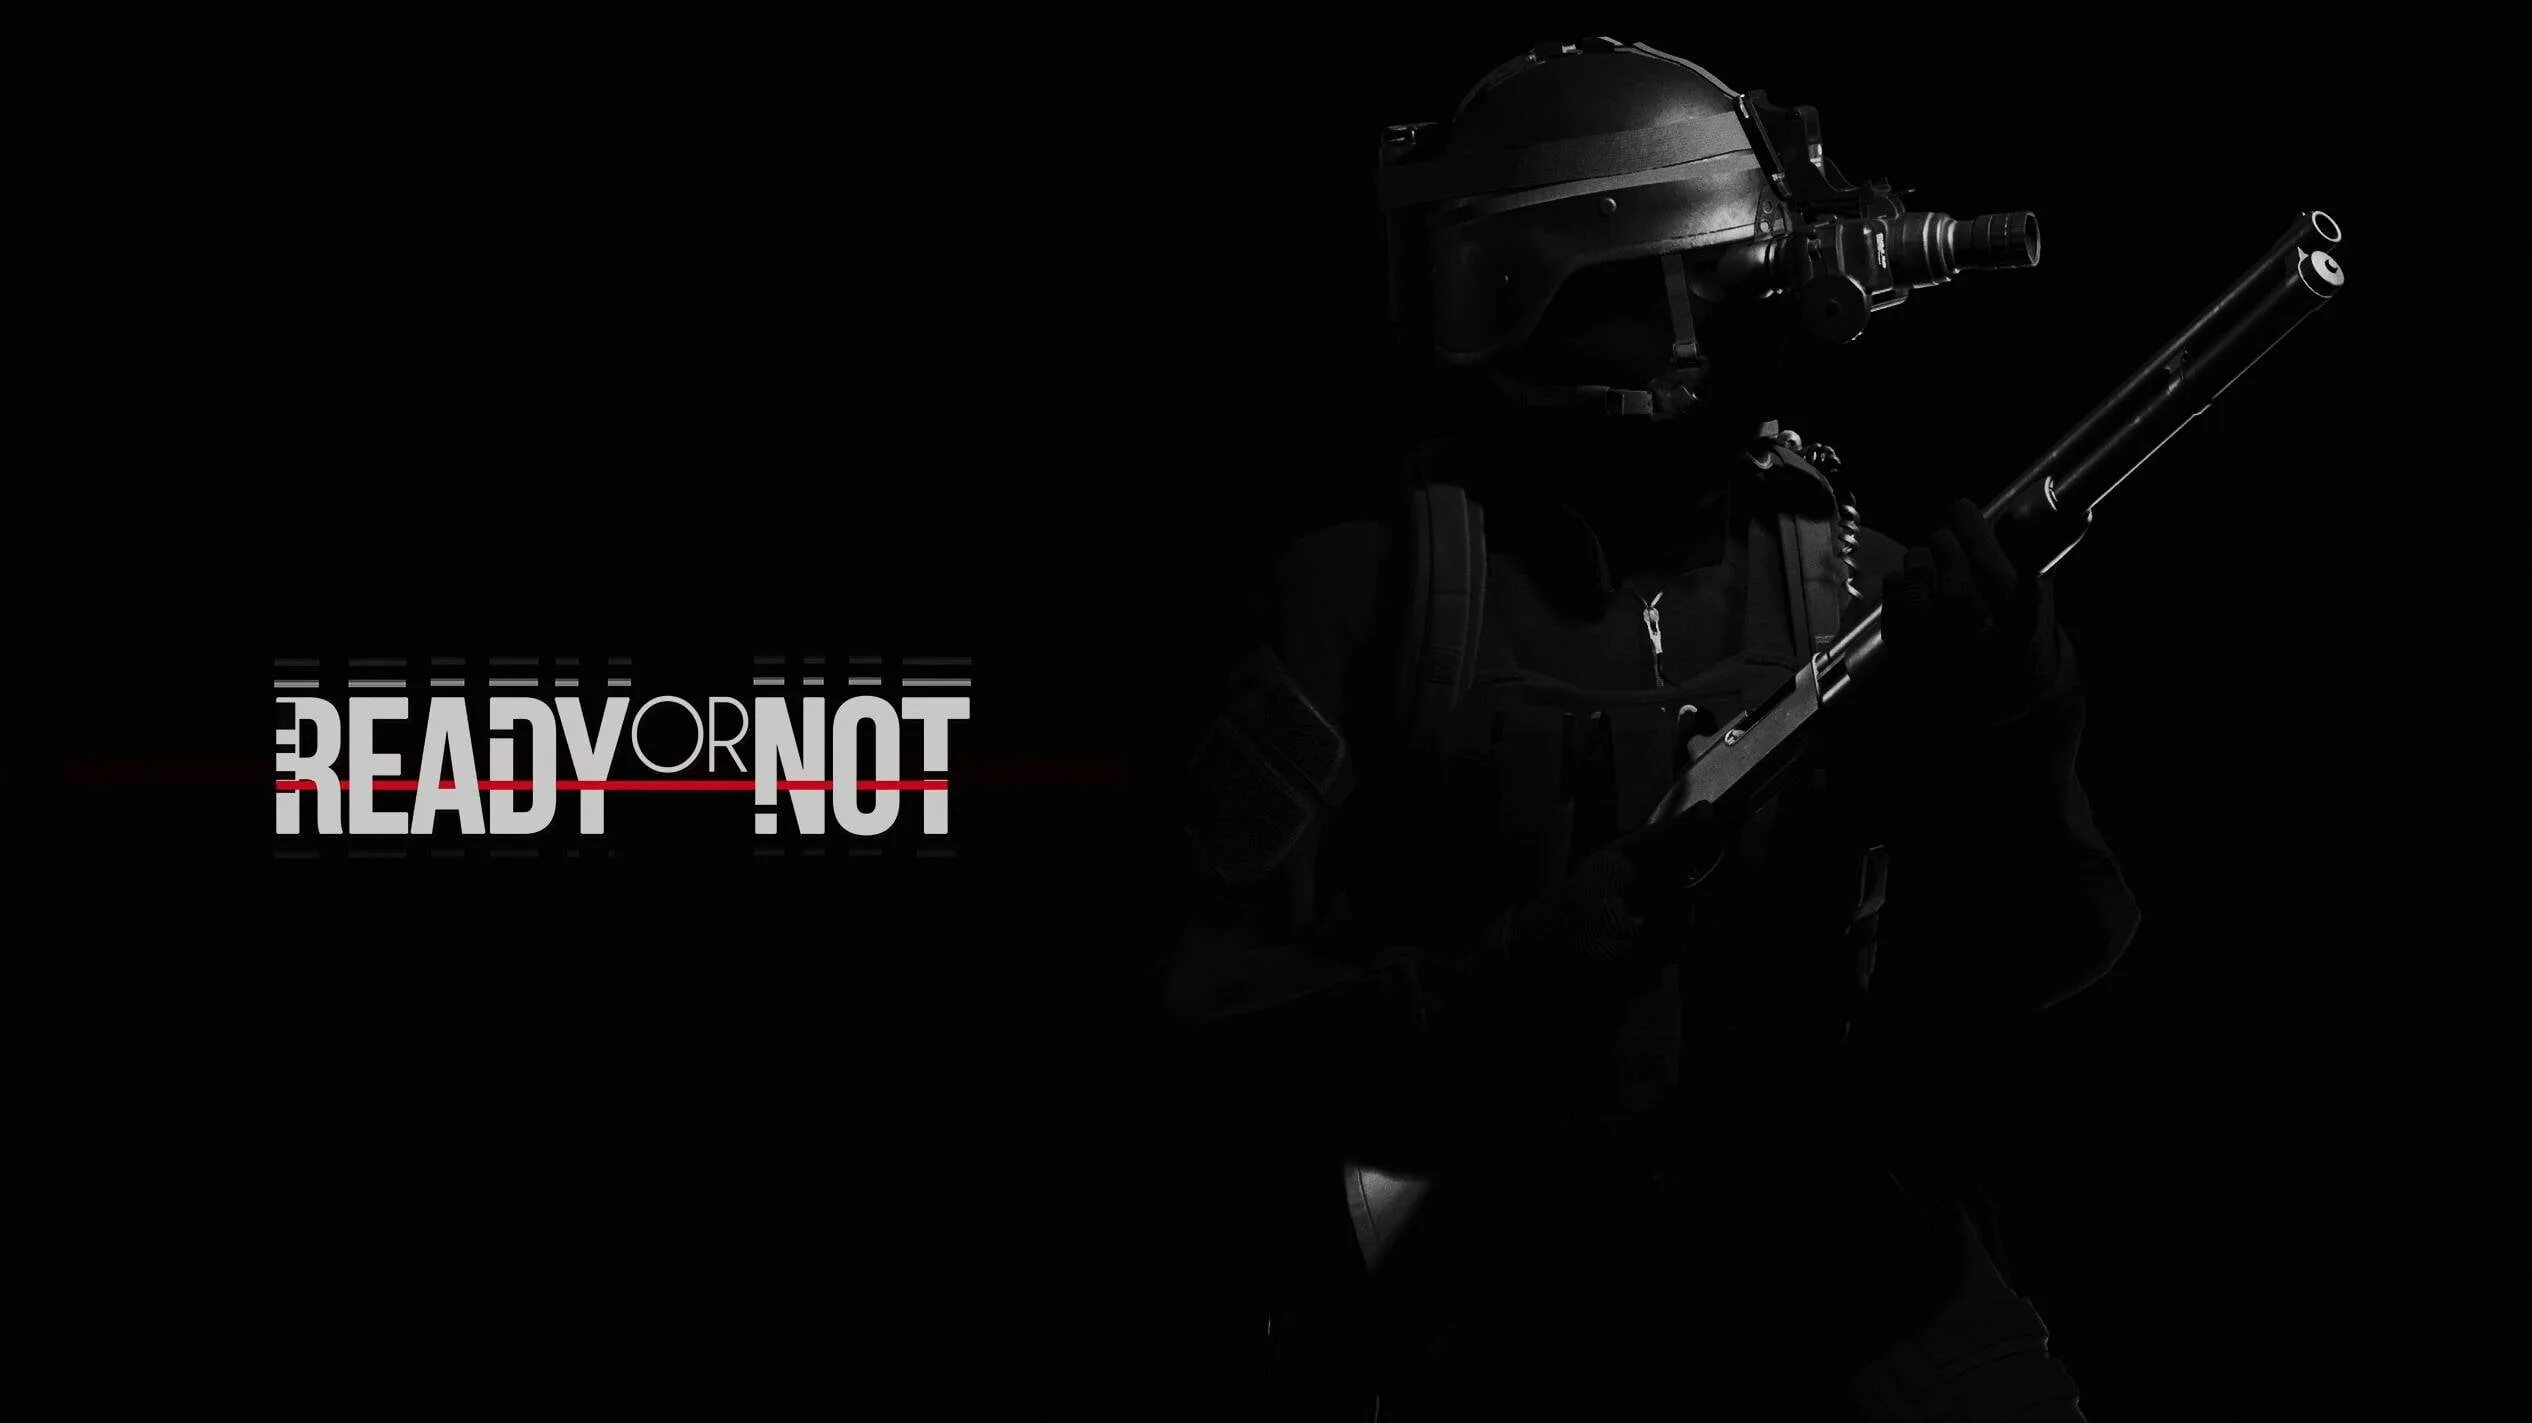 Ready or not фон. Ready or not игра. Ready or not обои. SWAT обои. Ready or not язык